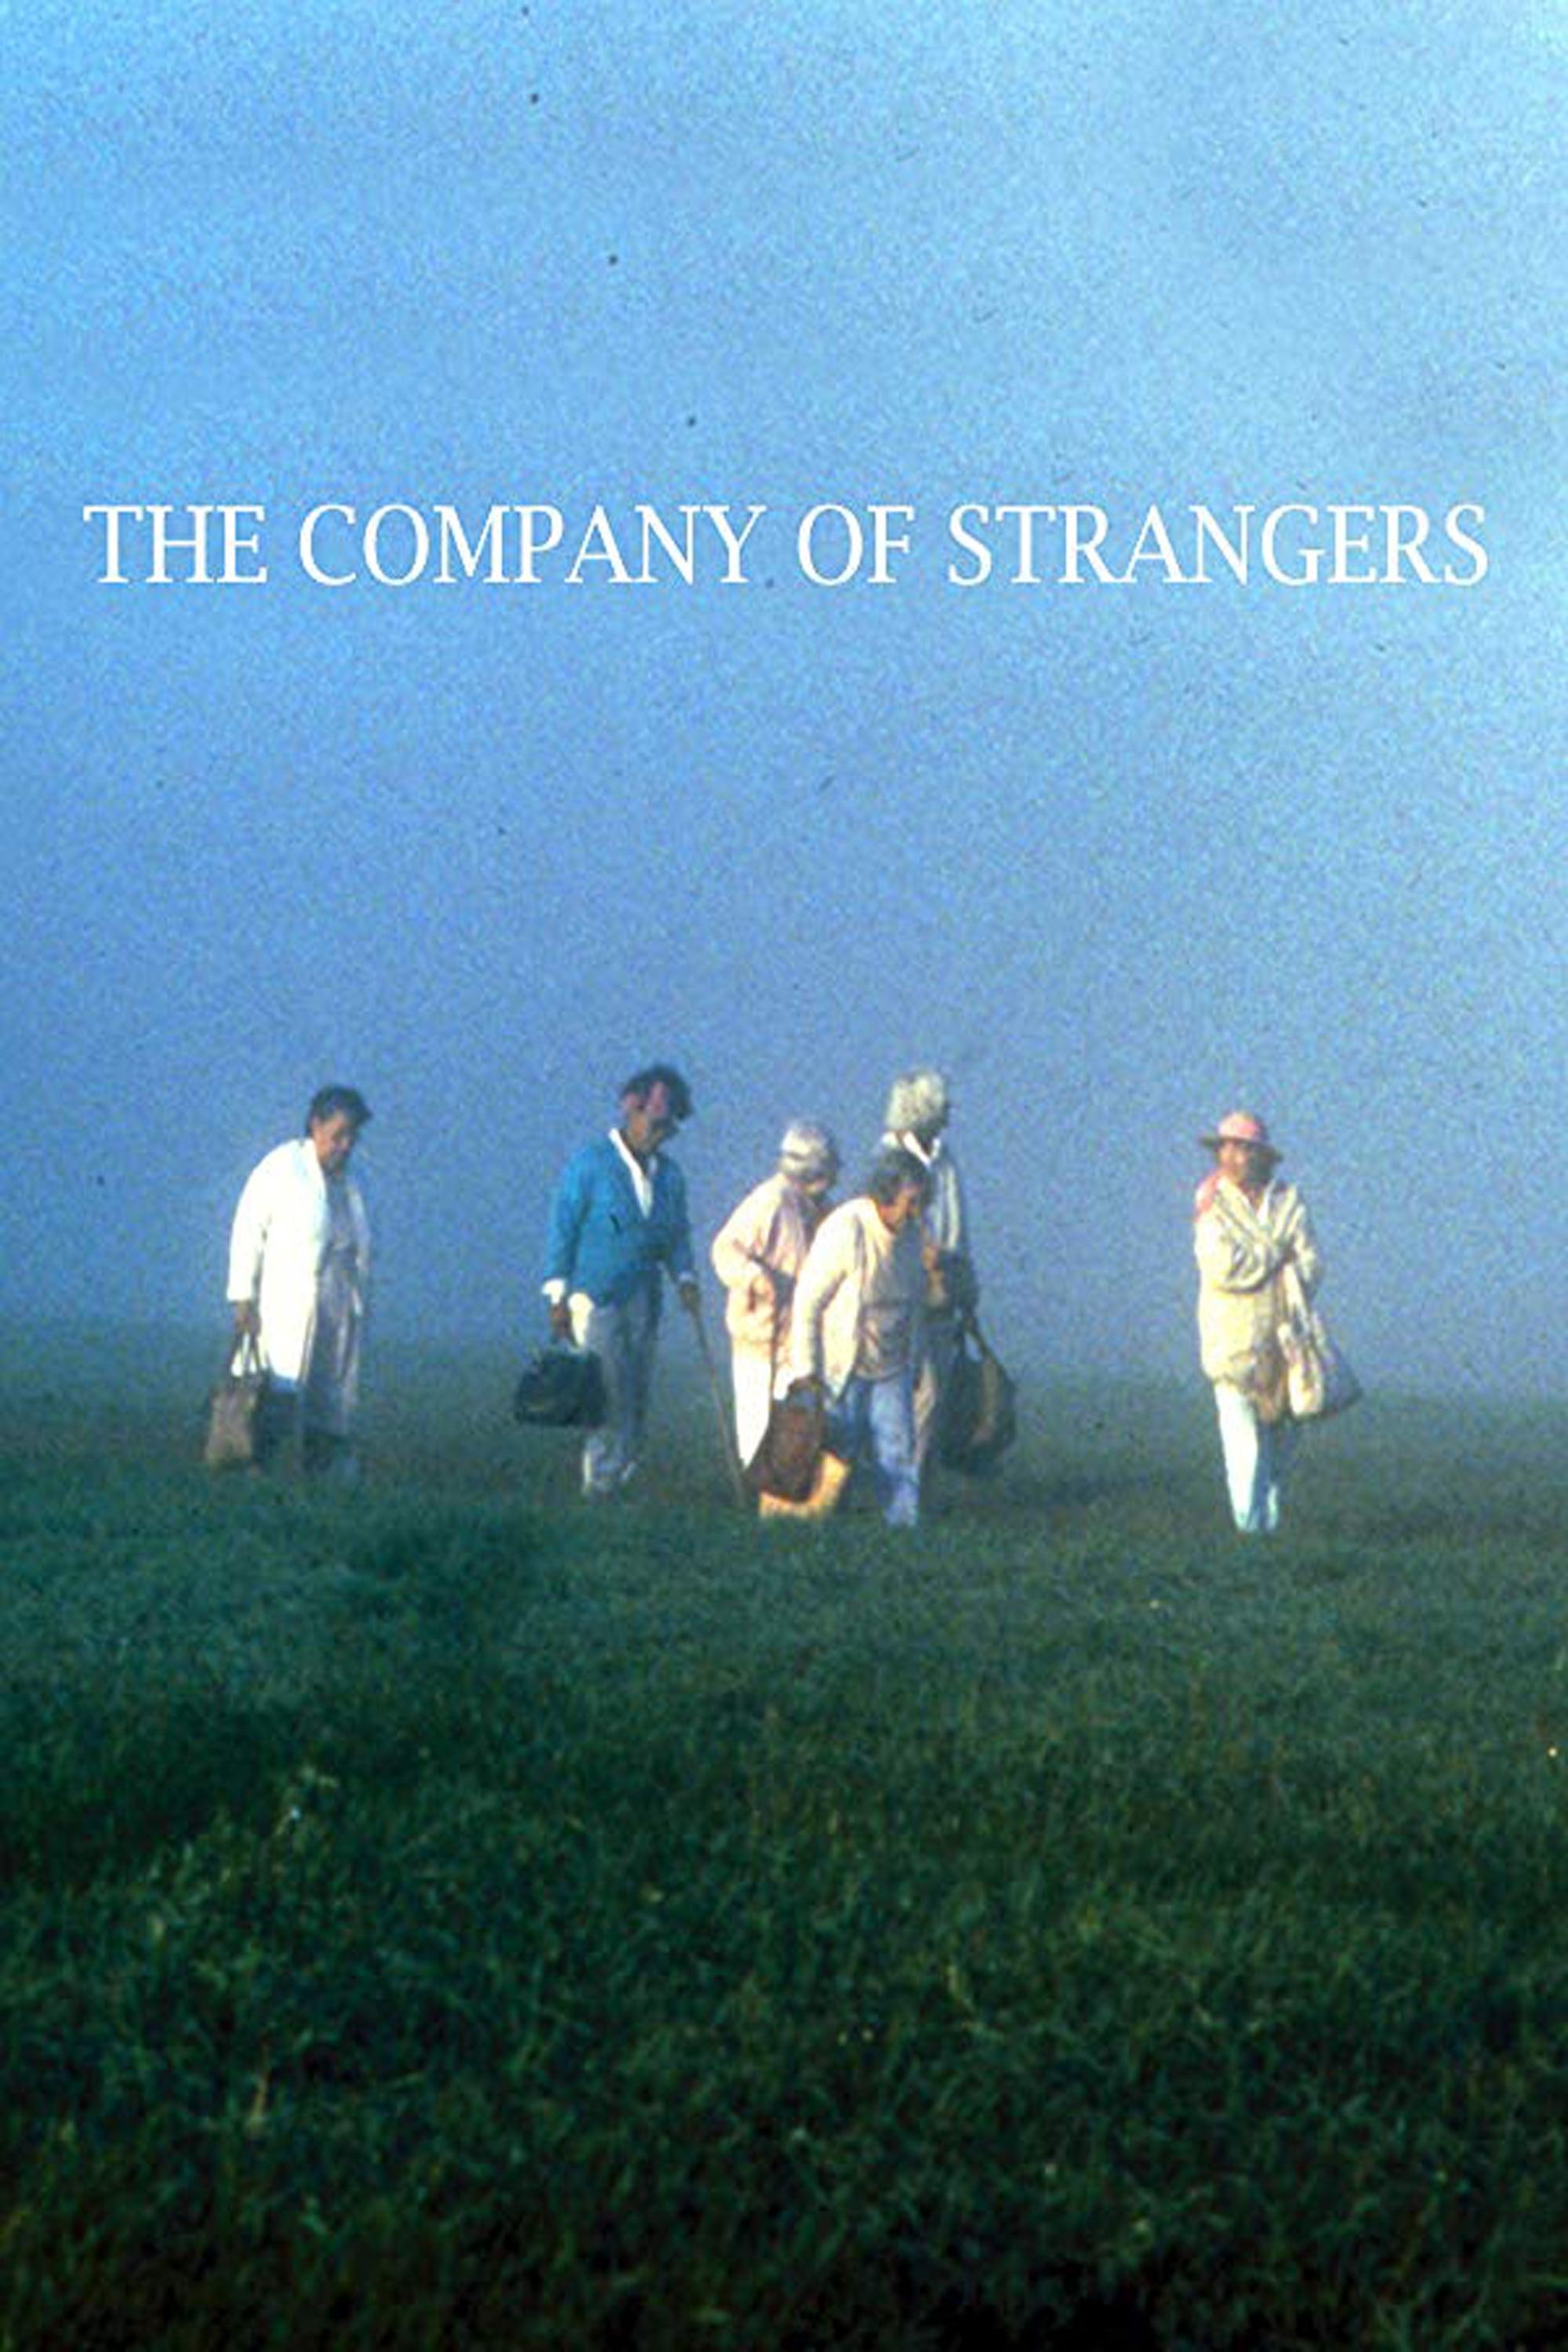 The Company of Strangers poster